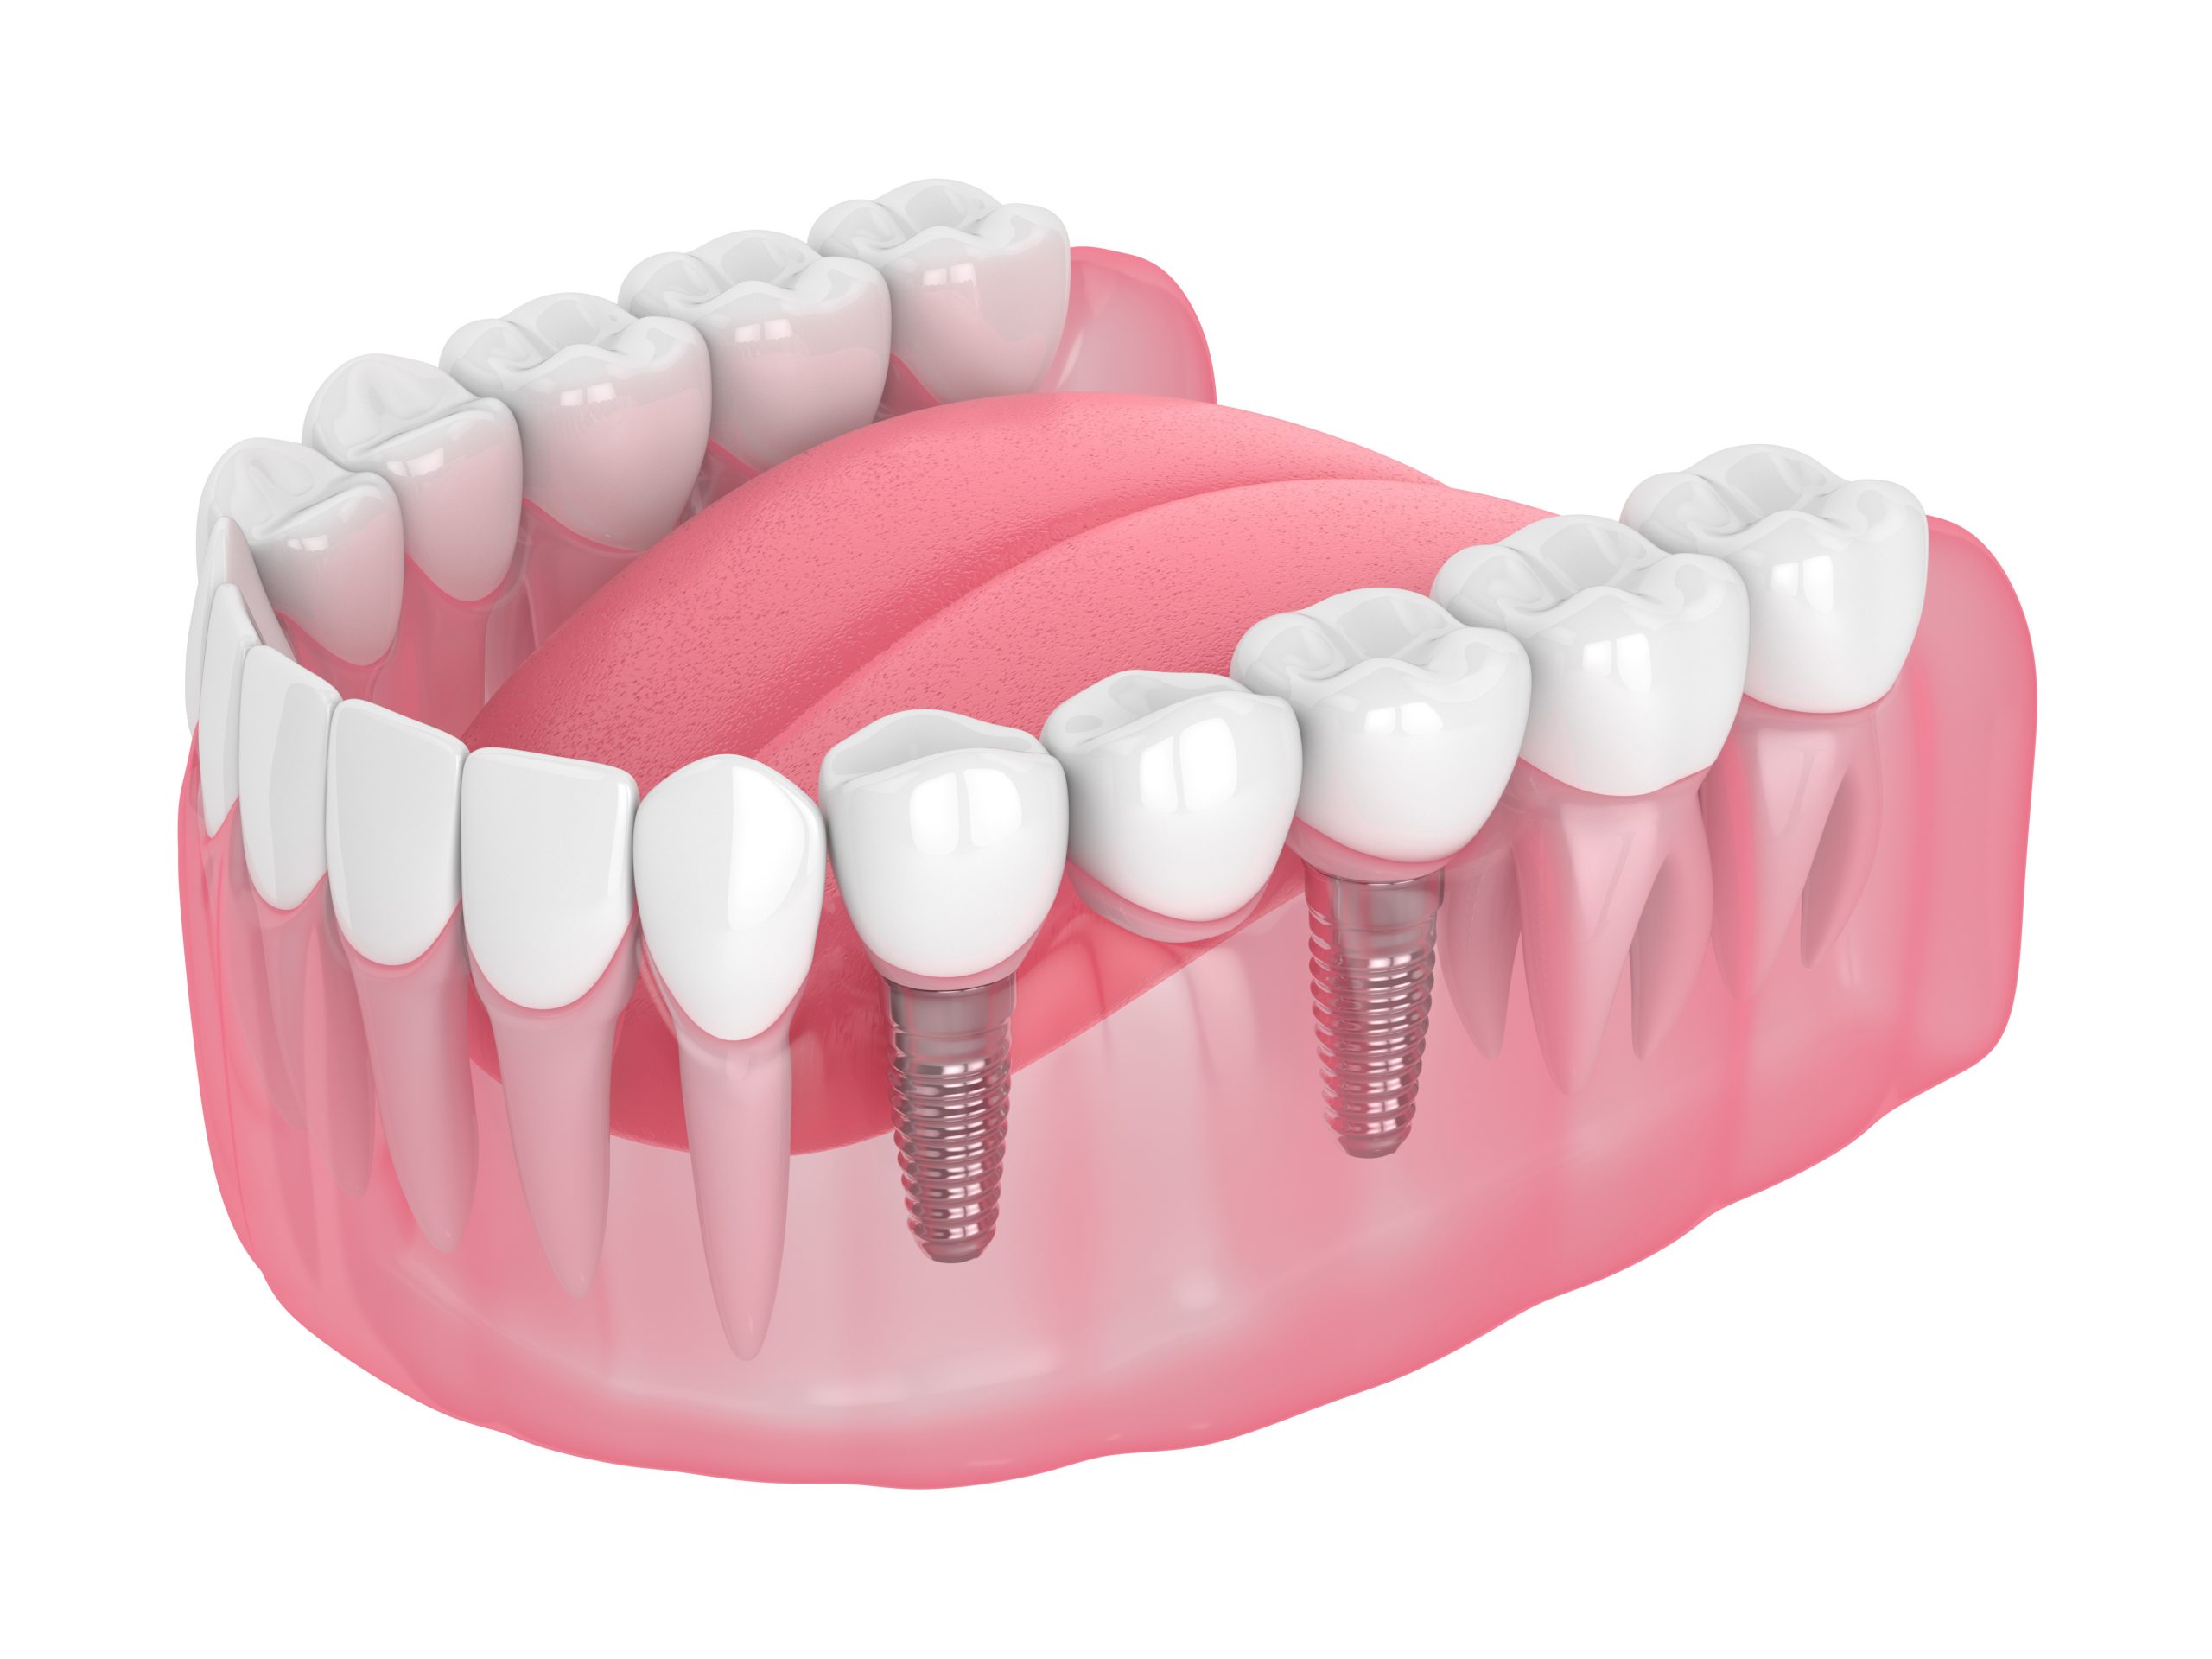 3d render of jaw with implants supported dental bridge isolated over white background